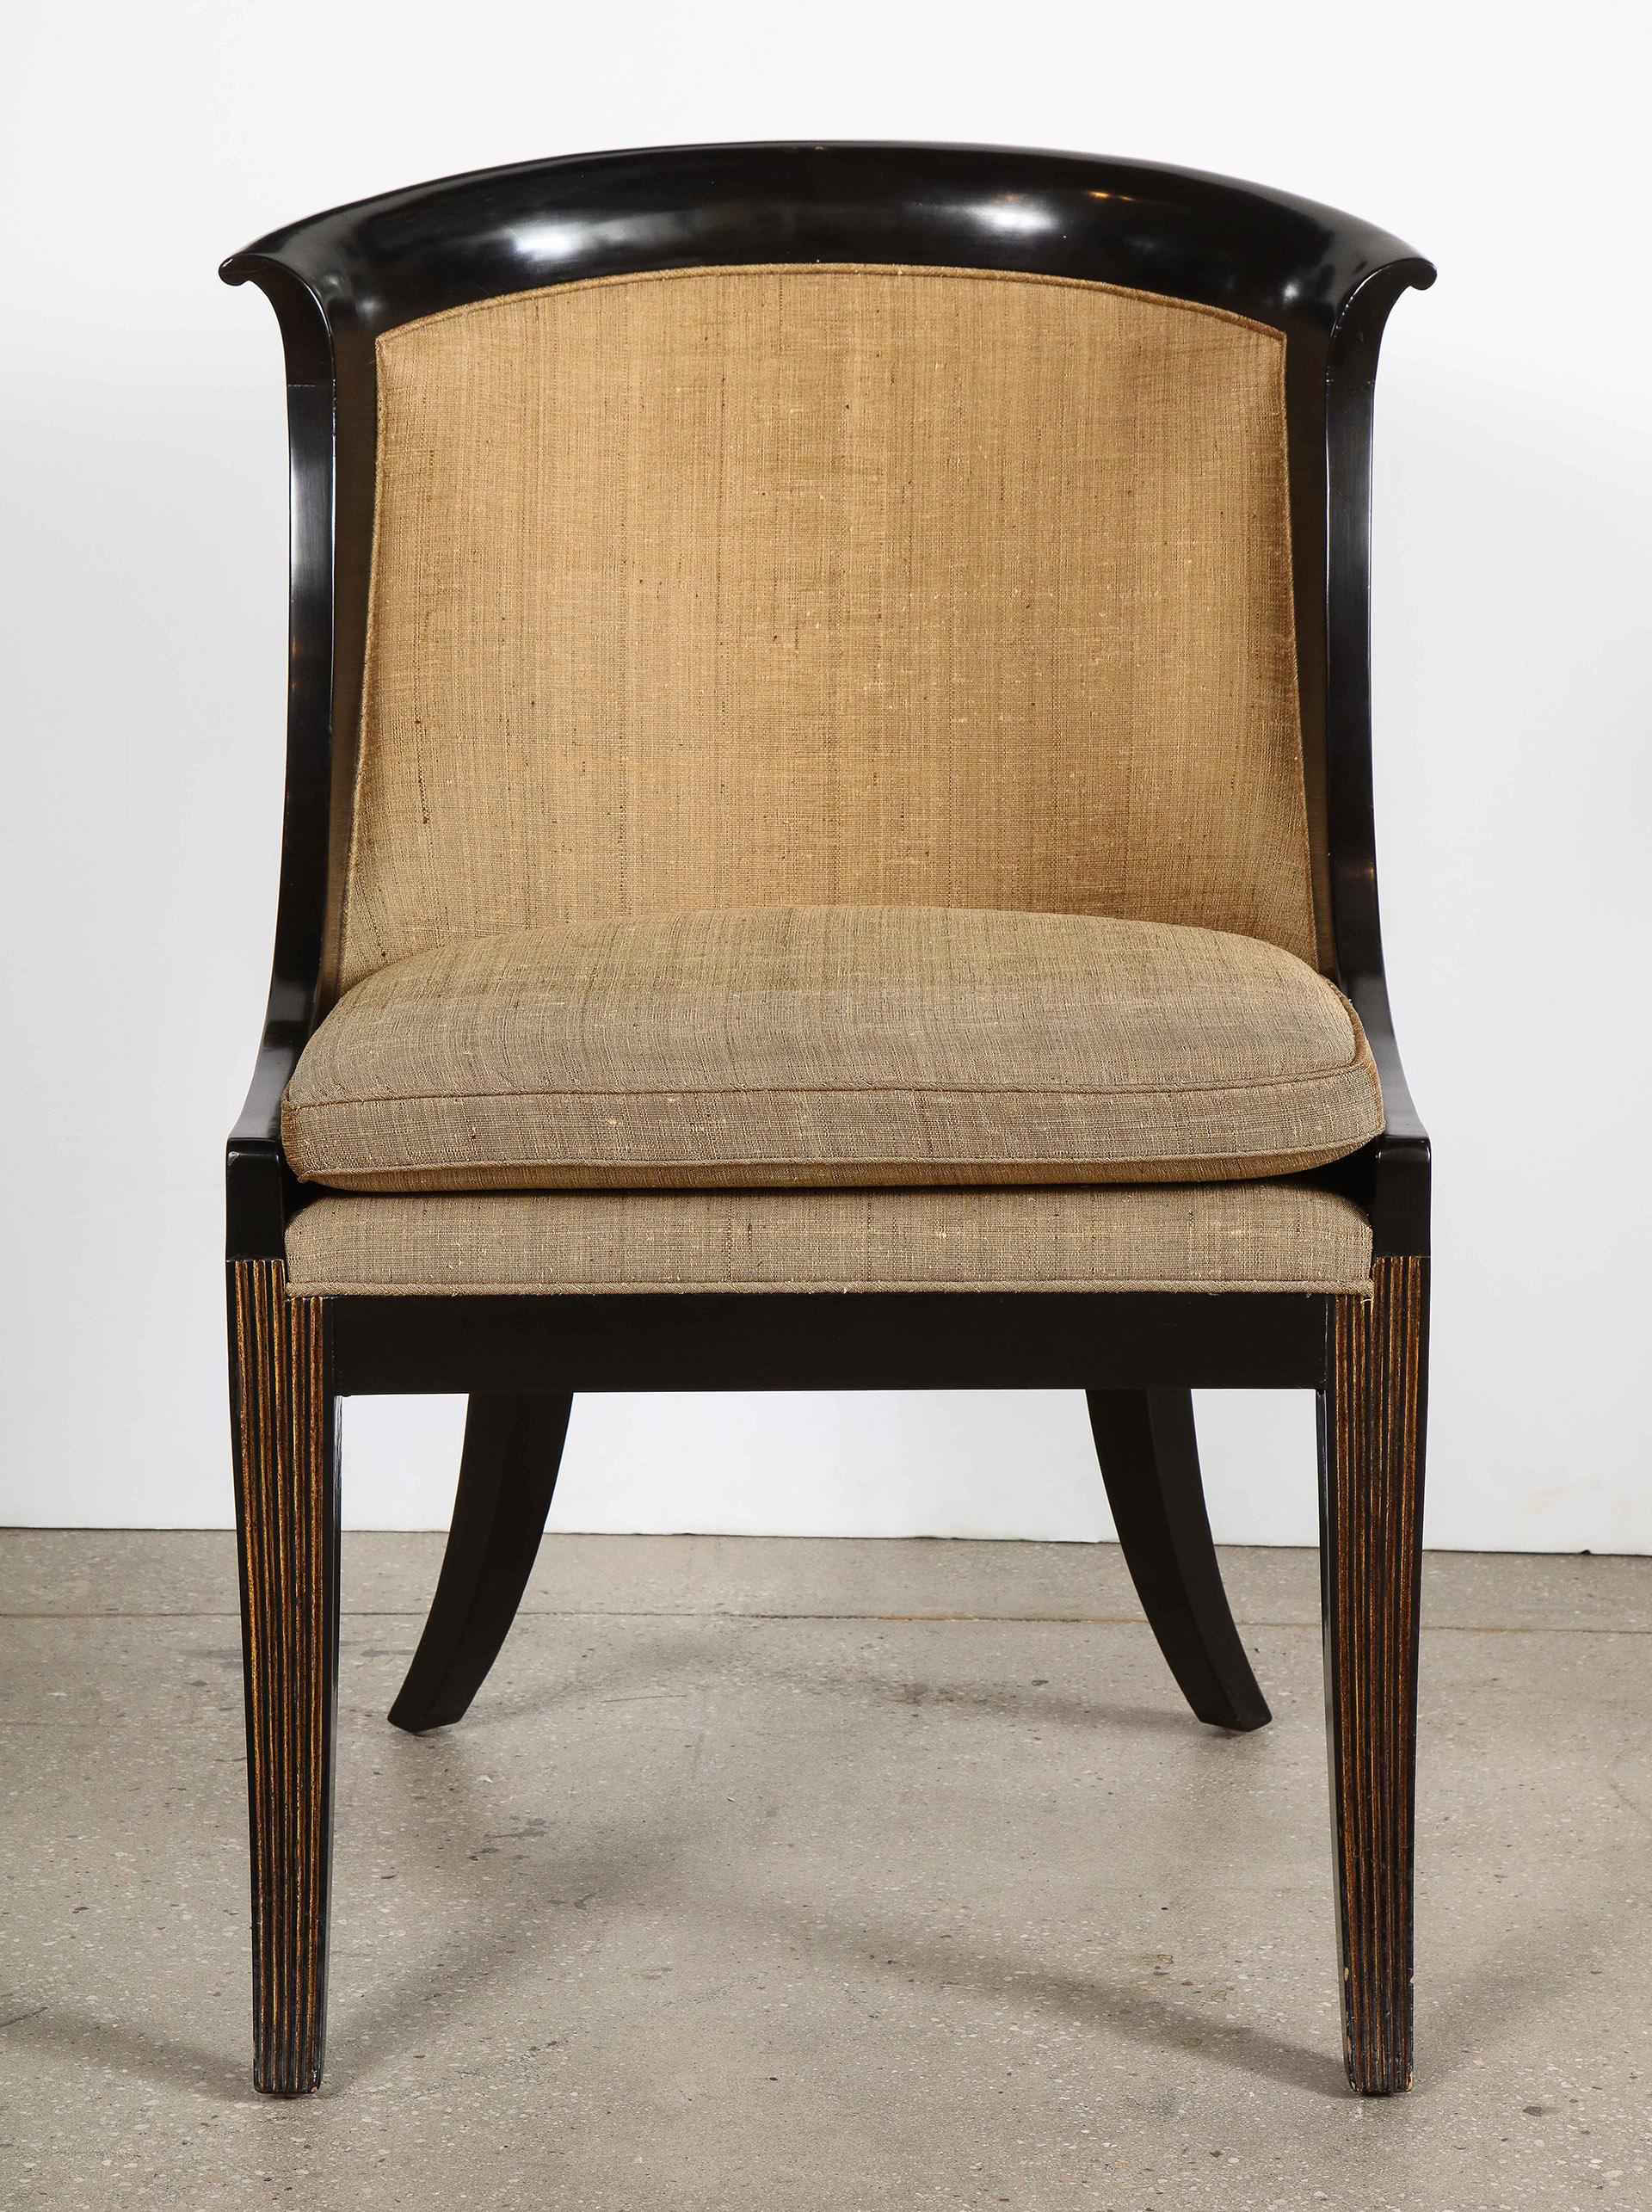 French Empire style black lacquer chair

The scroll topped rounded back on saber legs.